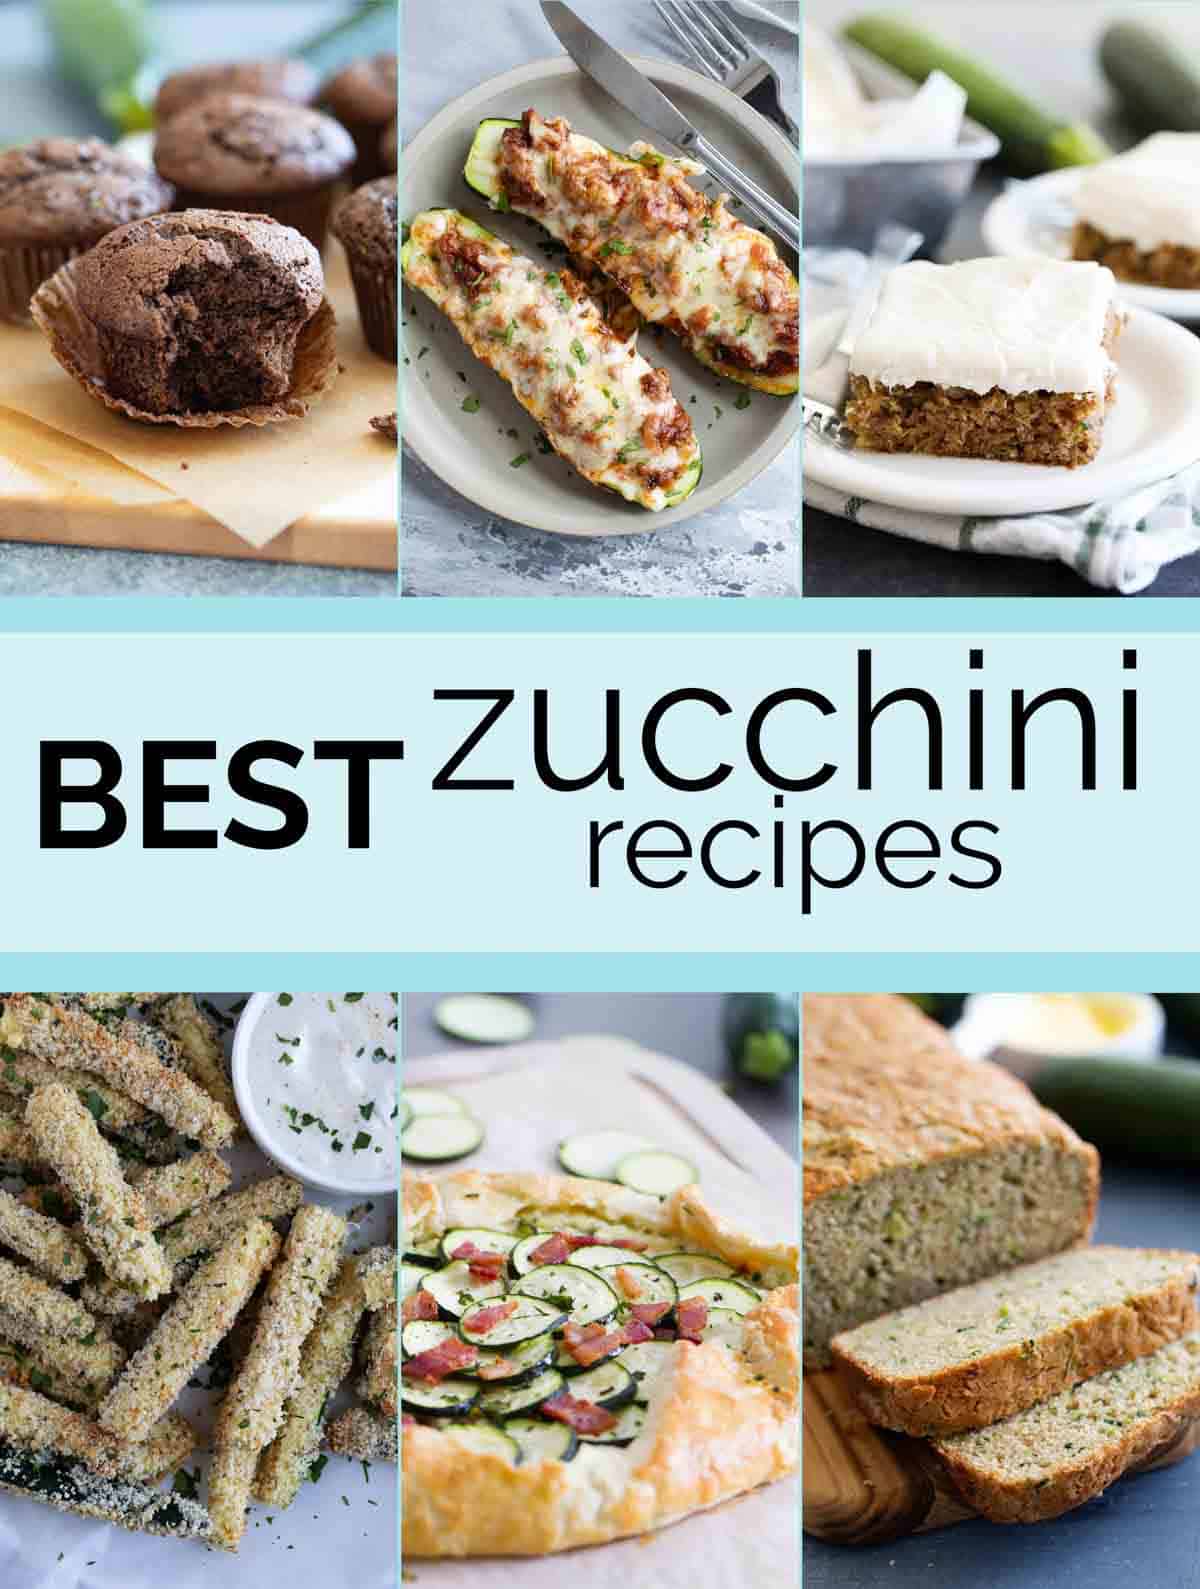 Best Zucchini Recipes collage with text bar in the middle.